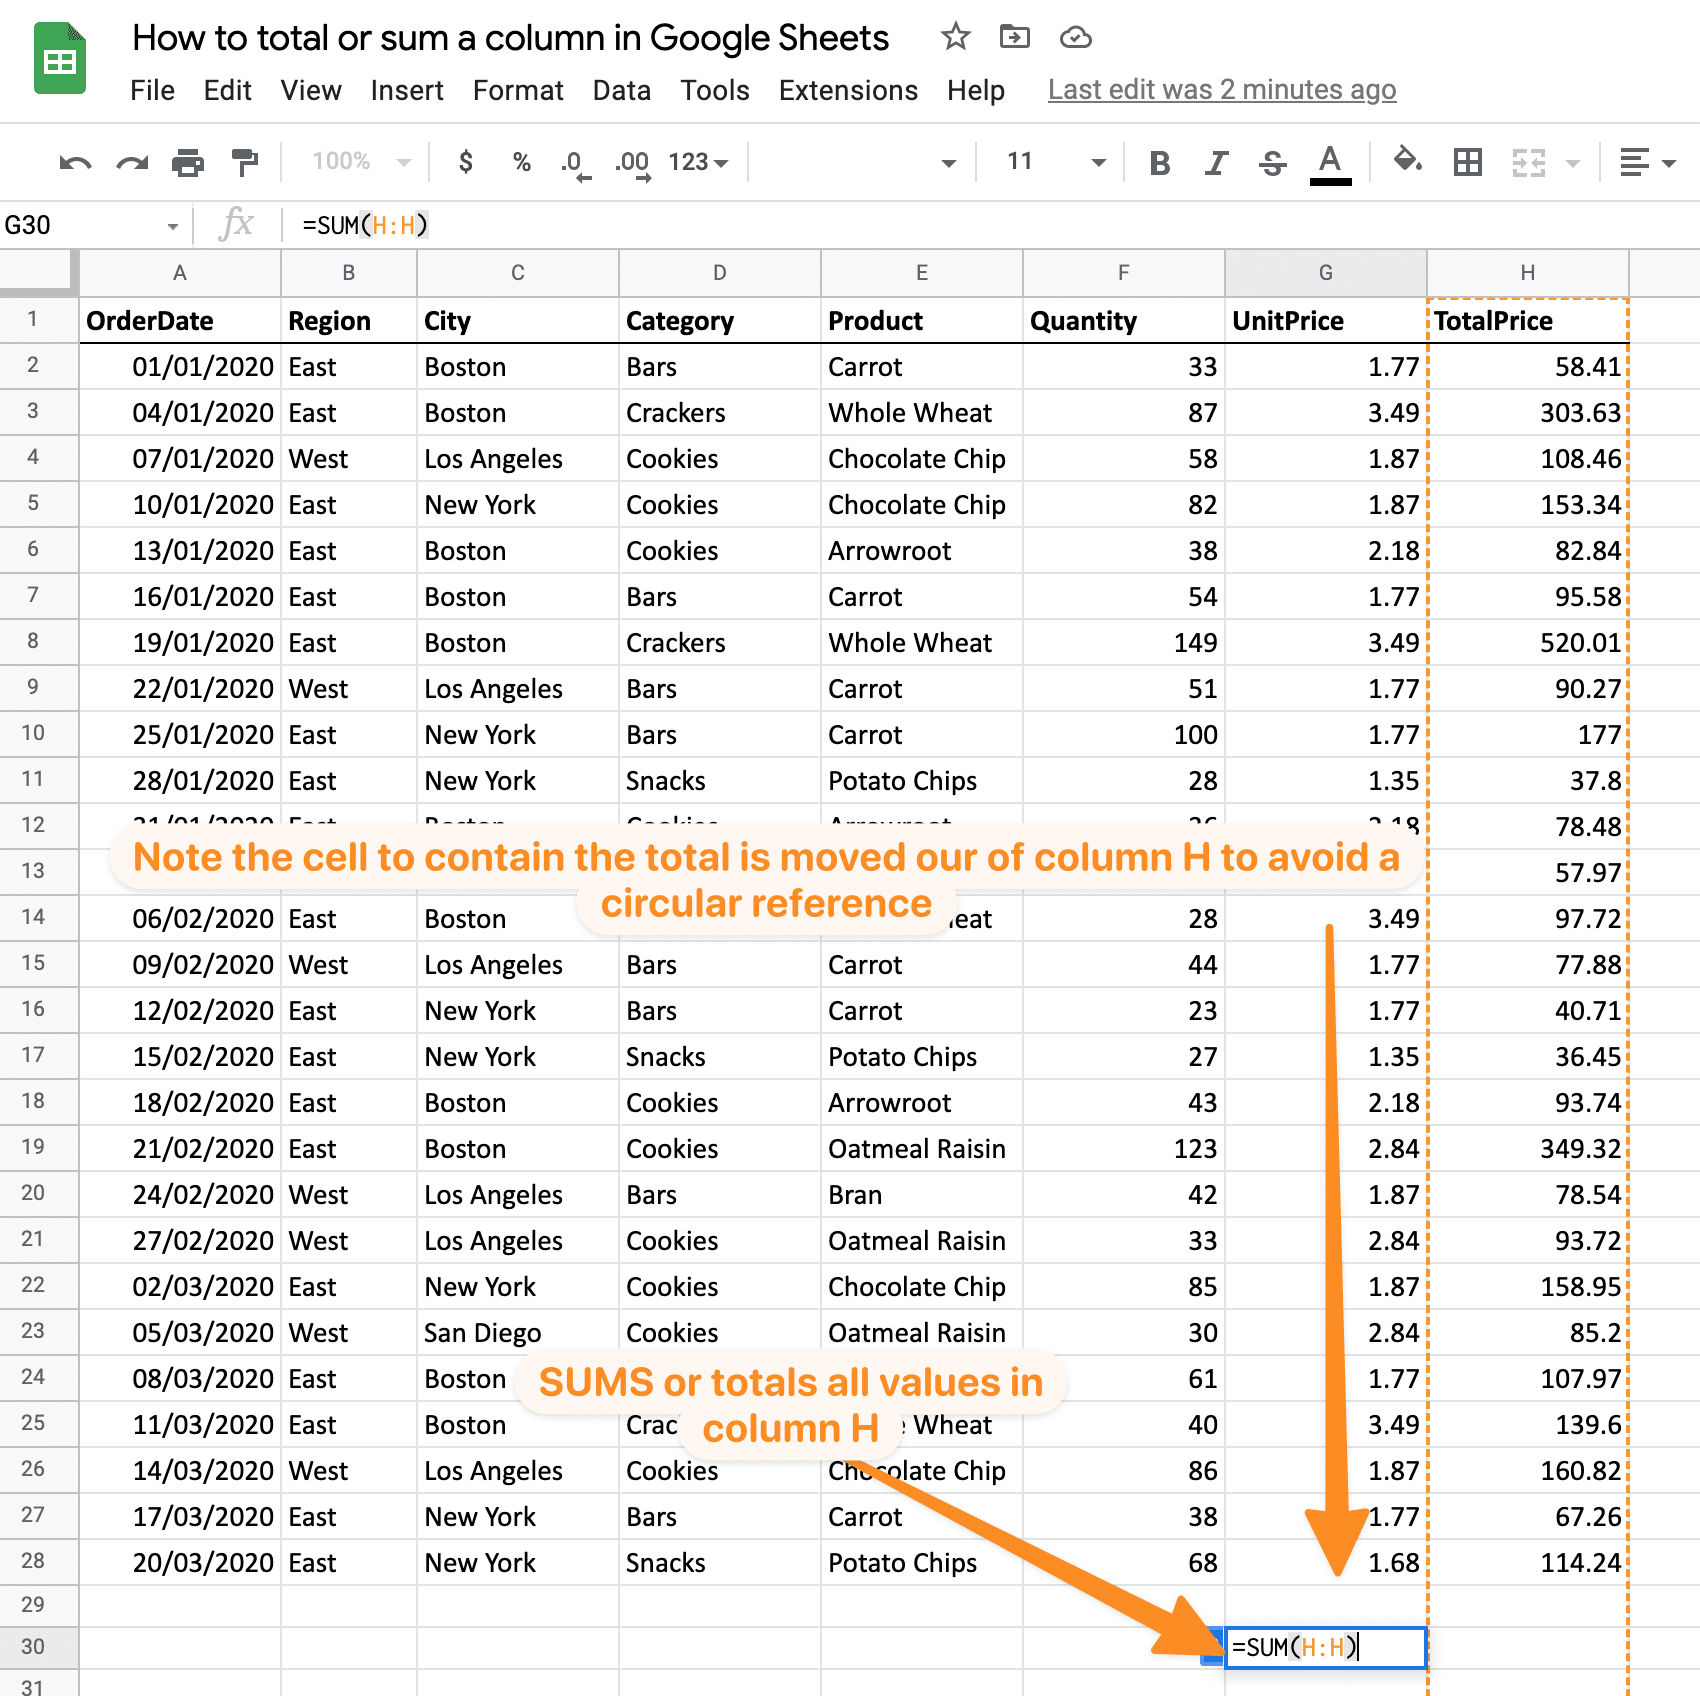 How to total or sum a column in Google Sheets